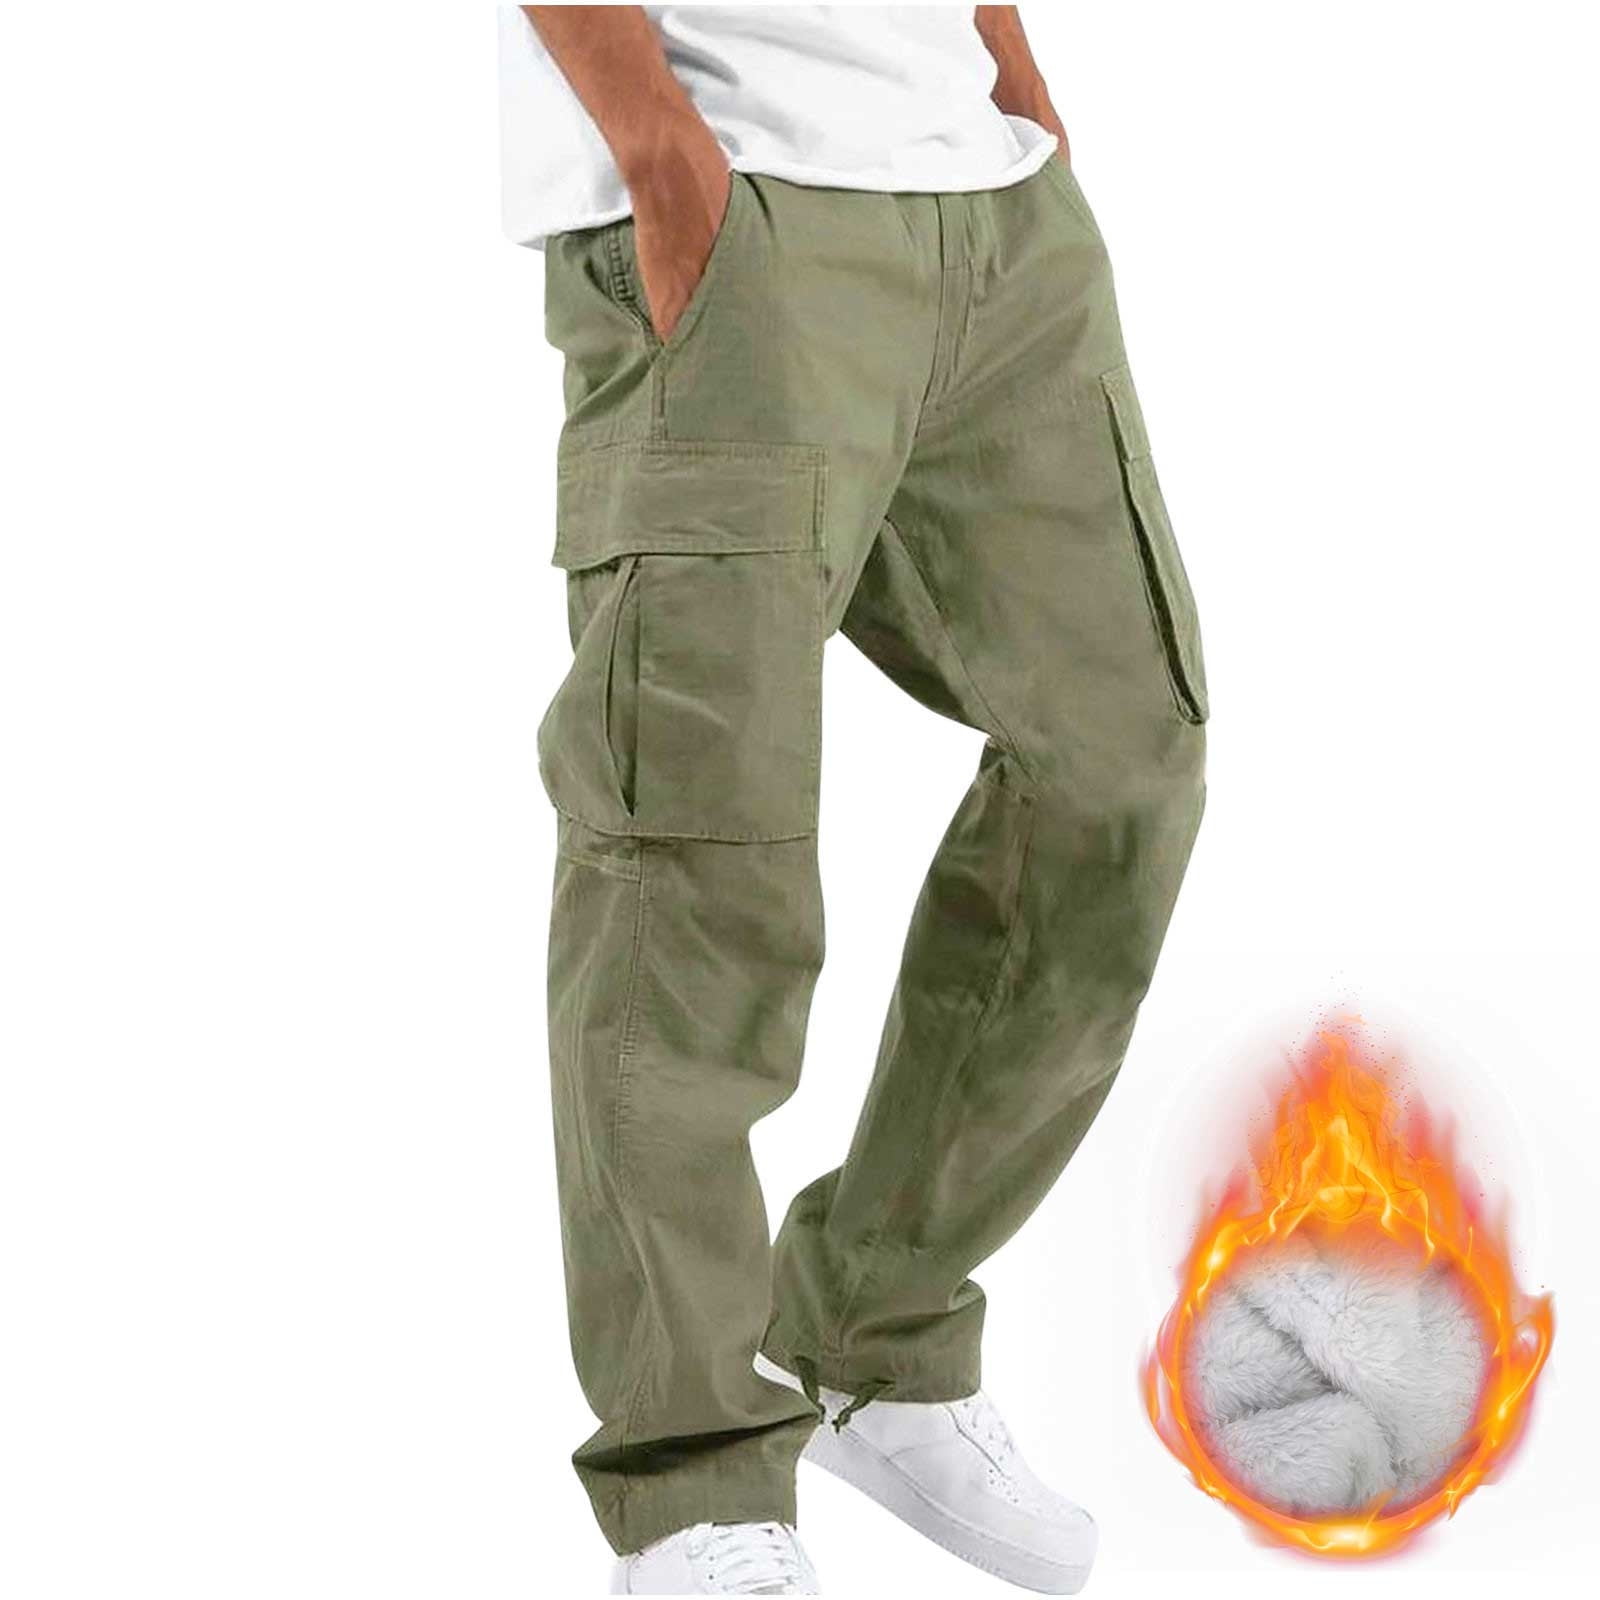 Plus Size Cargo Pants for Men Relaxed Fit Causal Slim Beach Work Streetwear  Khaki Baggy Pants with Zipper Pockets 